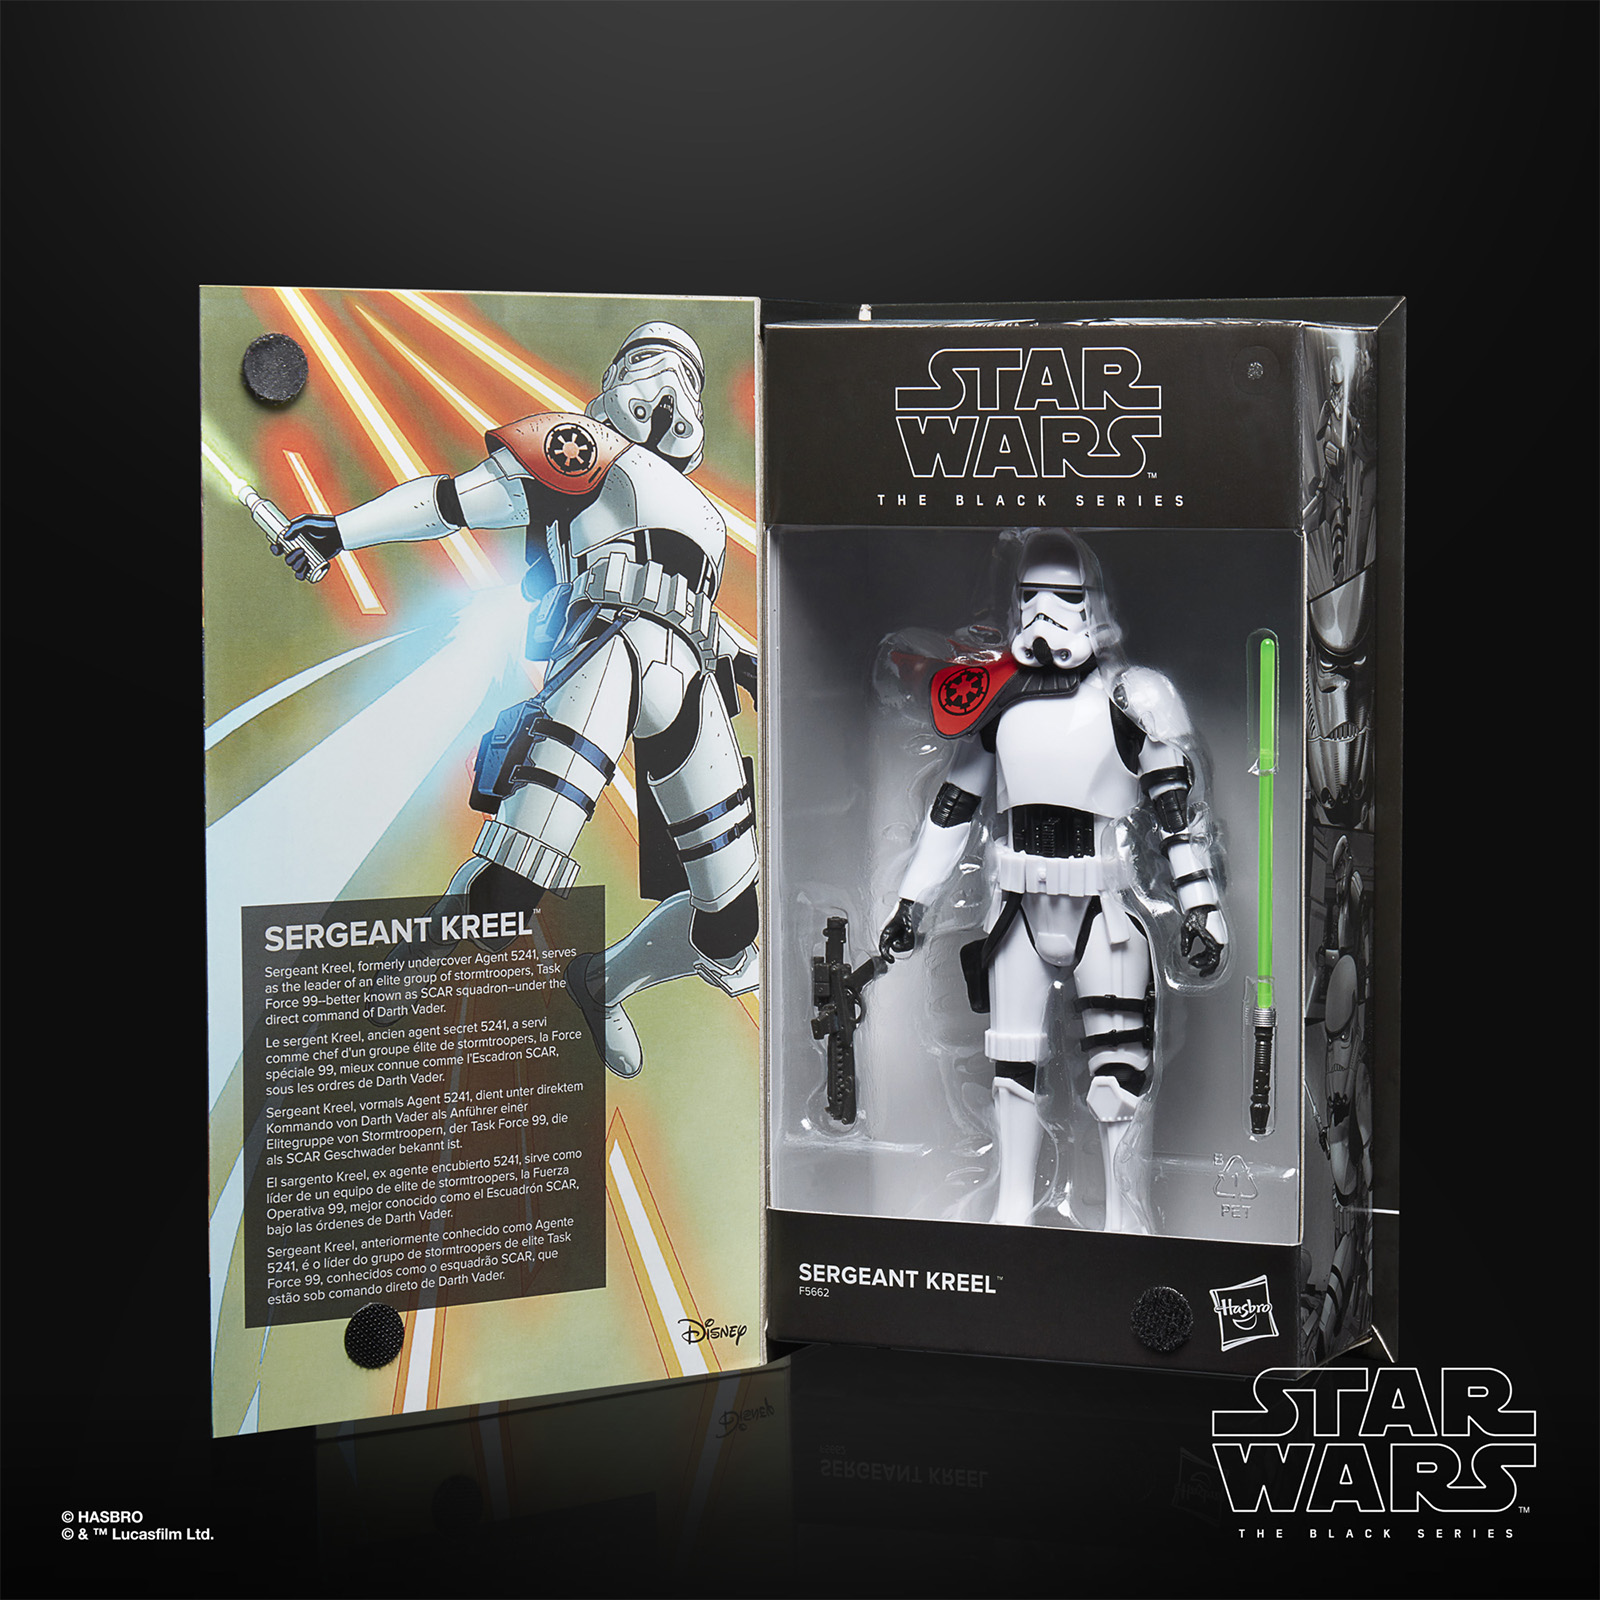 Image showing Stormtrooper figure inside an open box. Text at the bottom right reads Star Wars